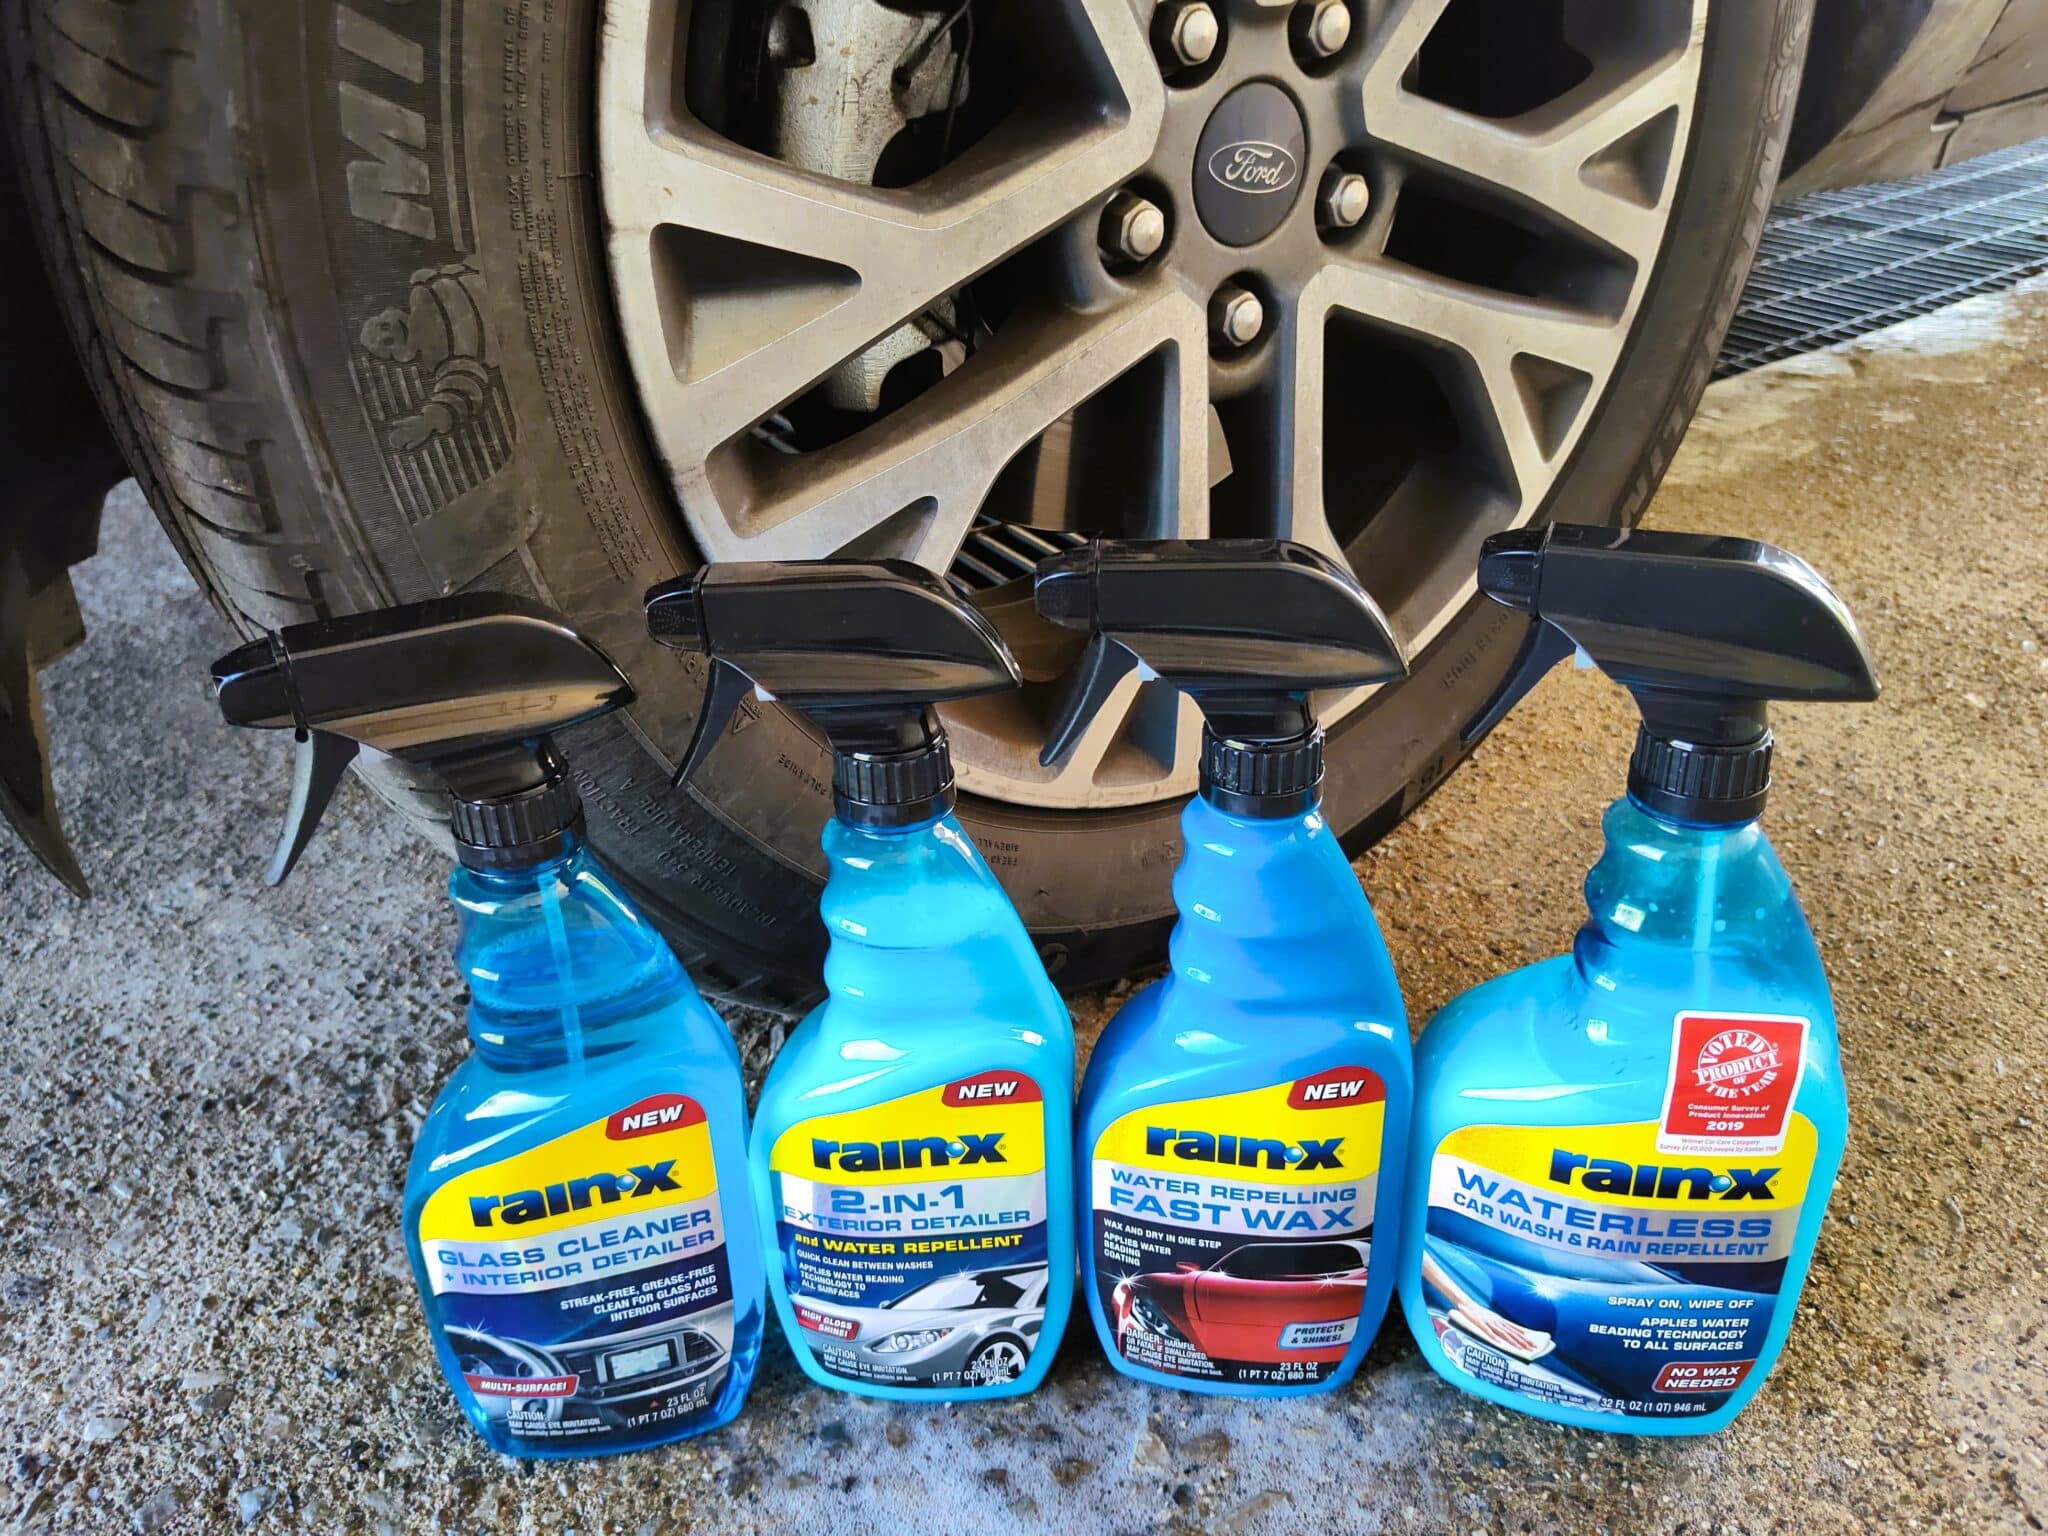 Can You Wash Your Car With Rain-X? (Video)